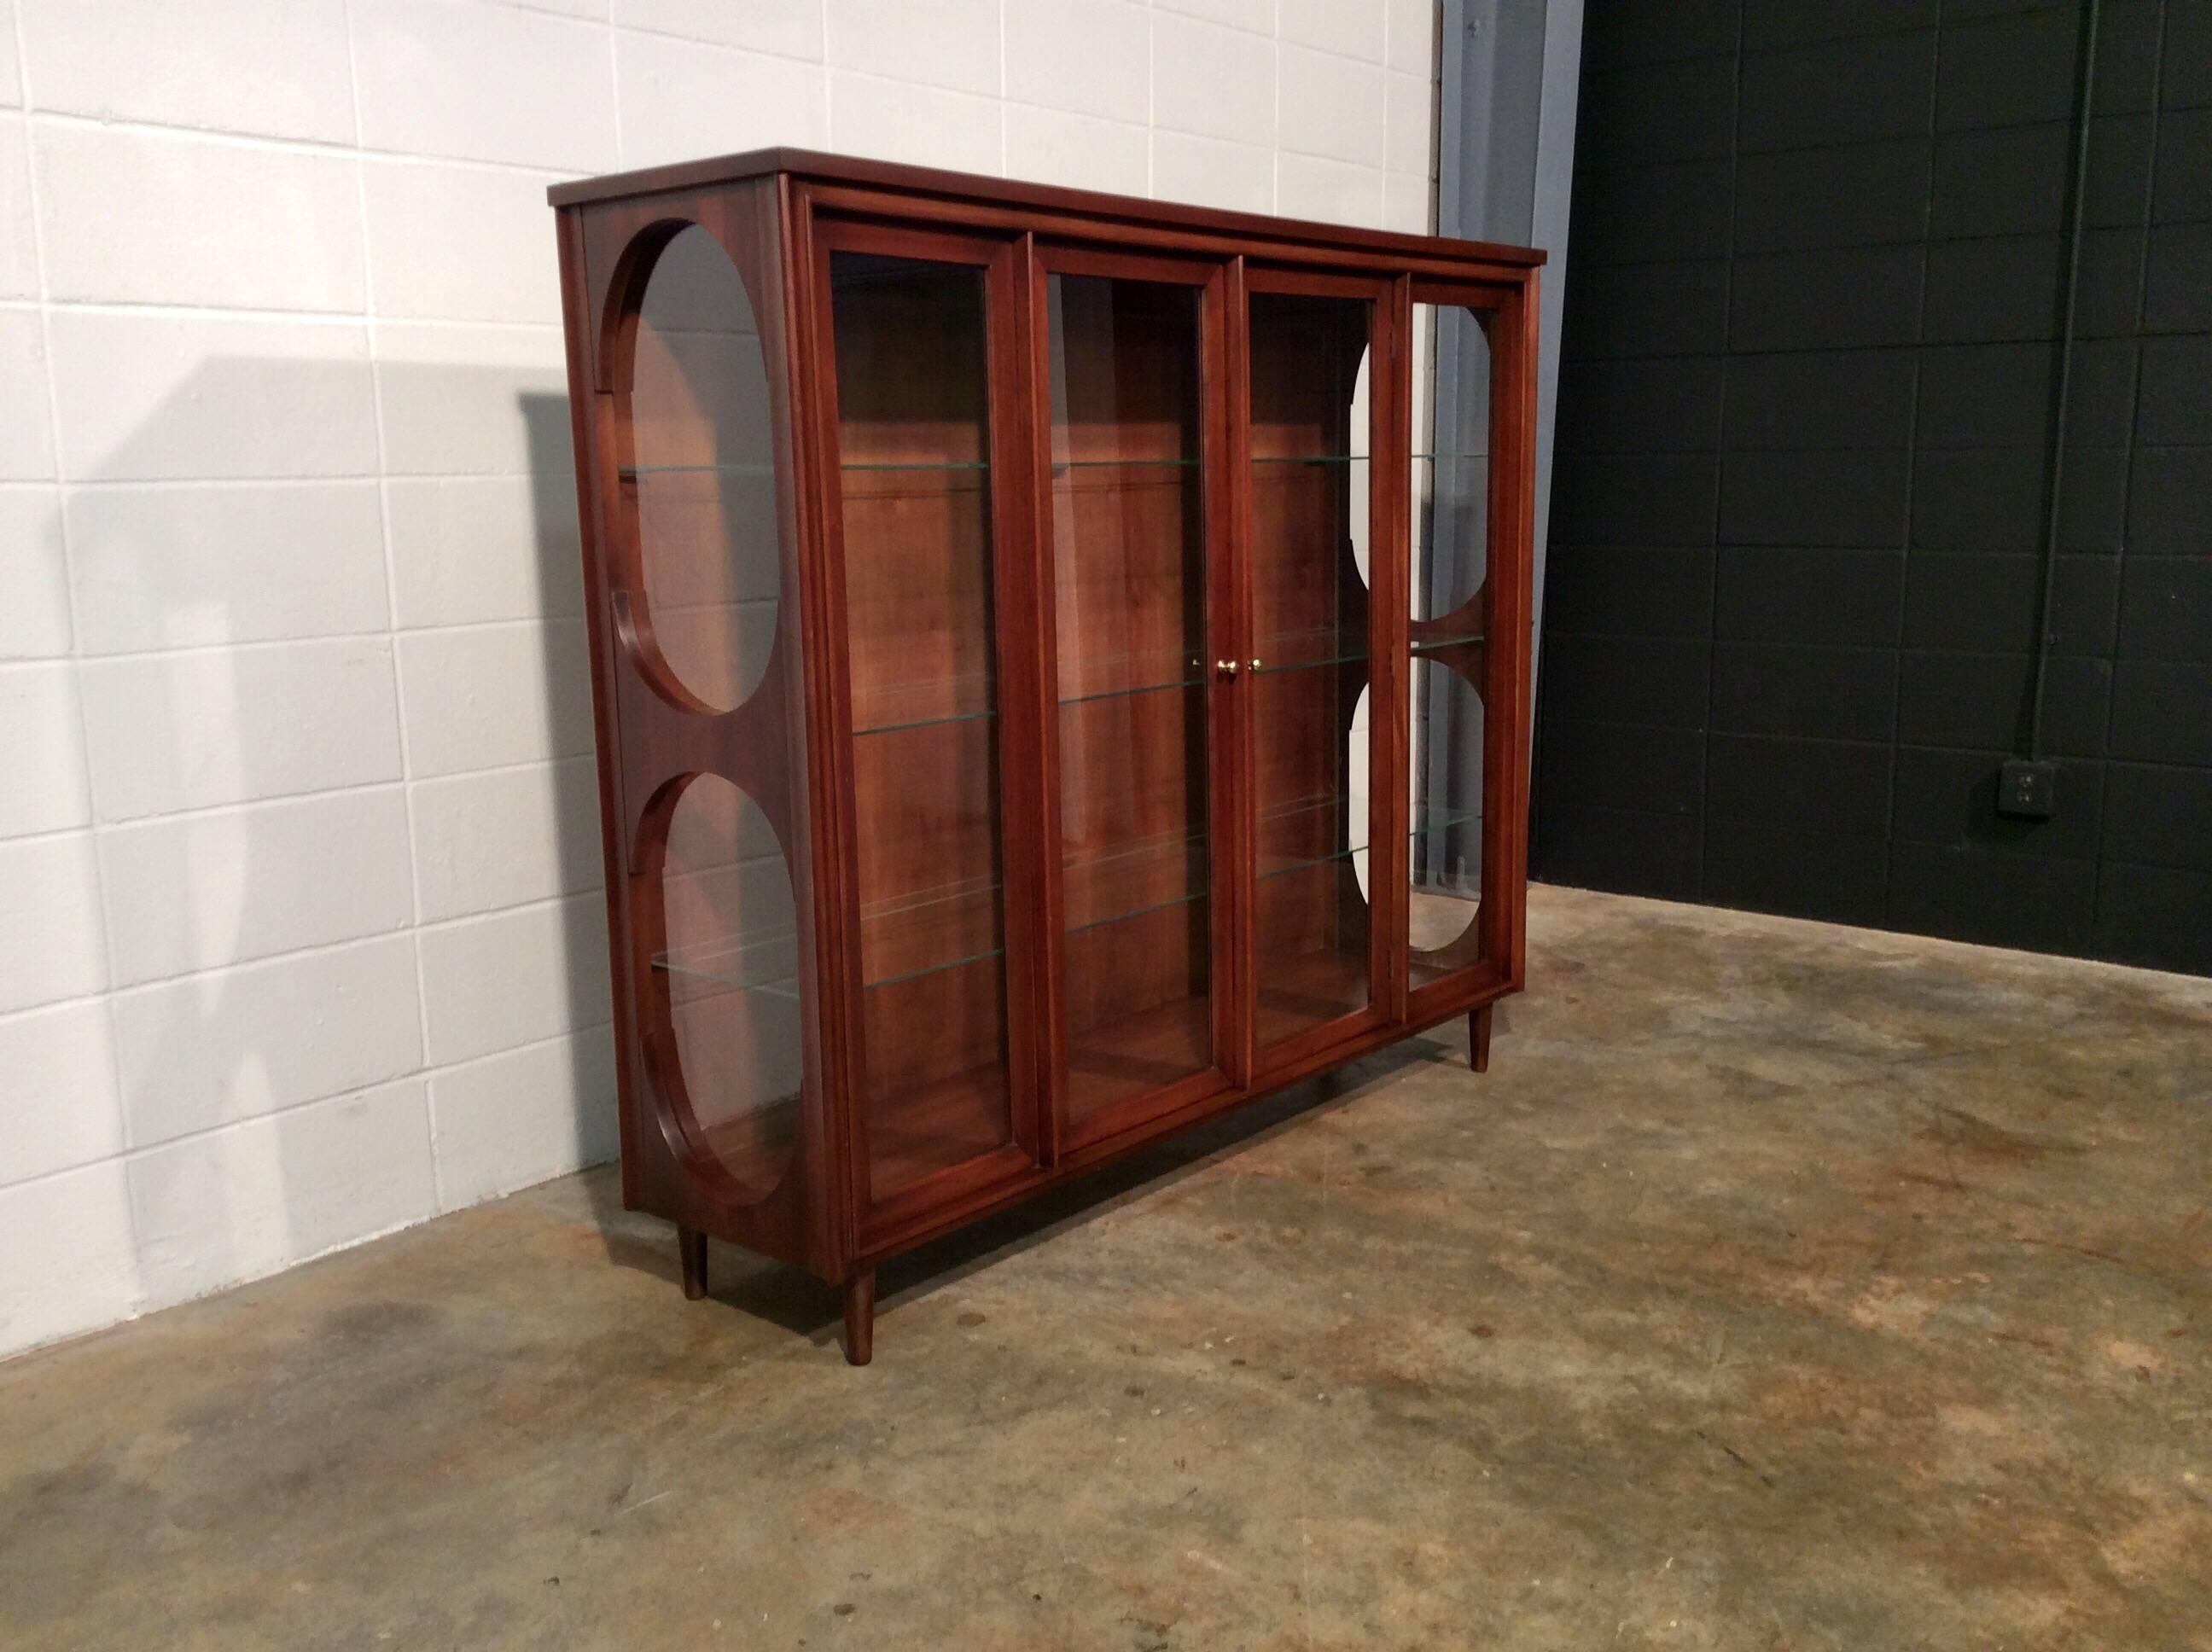 Mid-Century Modern walnut and glass display cabinet by Kent Coffey on added pencil legs. Very unique with see through side panels. Perfect for displaying china, pottery, or even purses and shoes. The cabinet does have a light in the top so you can